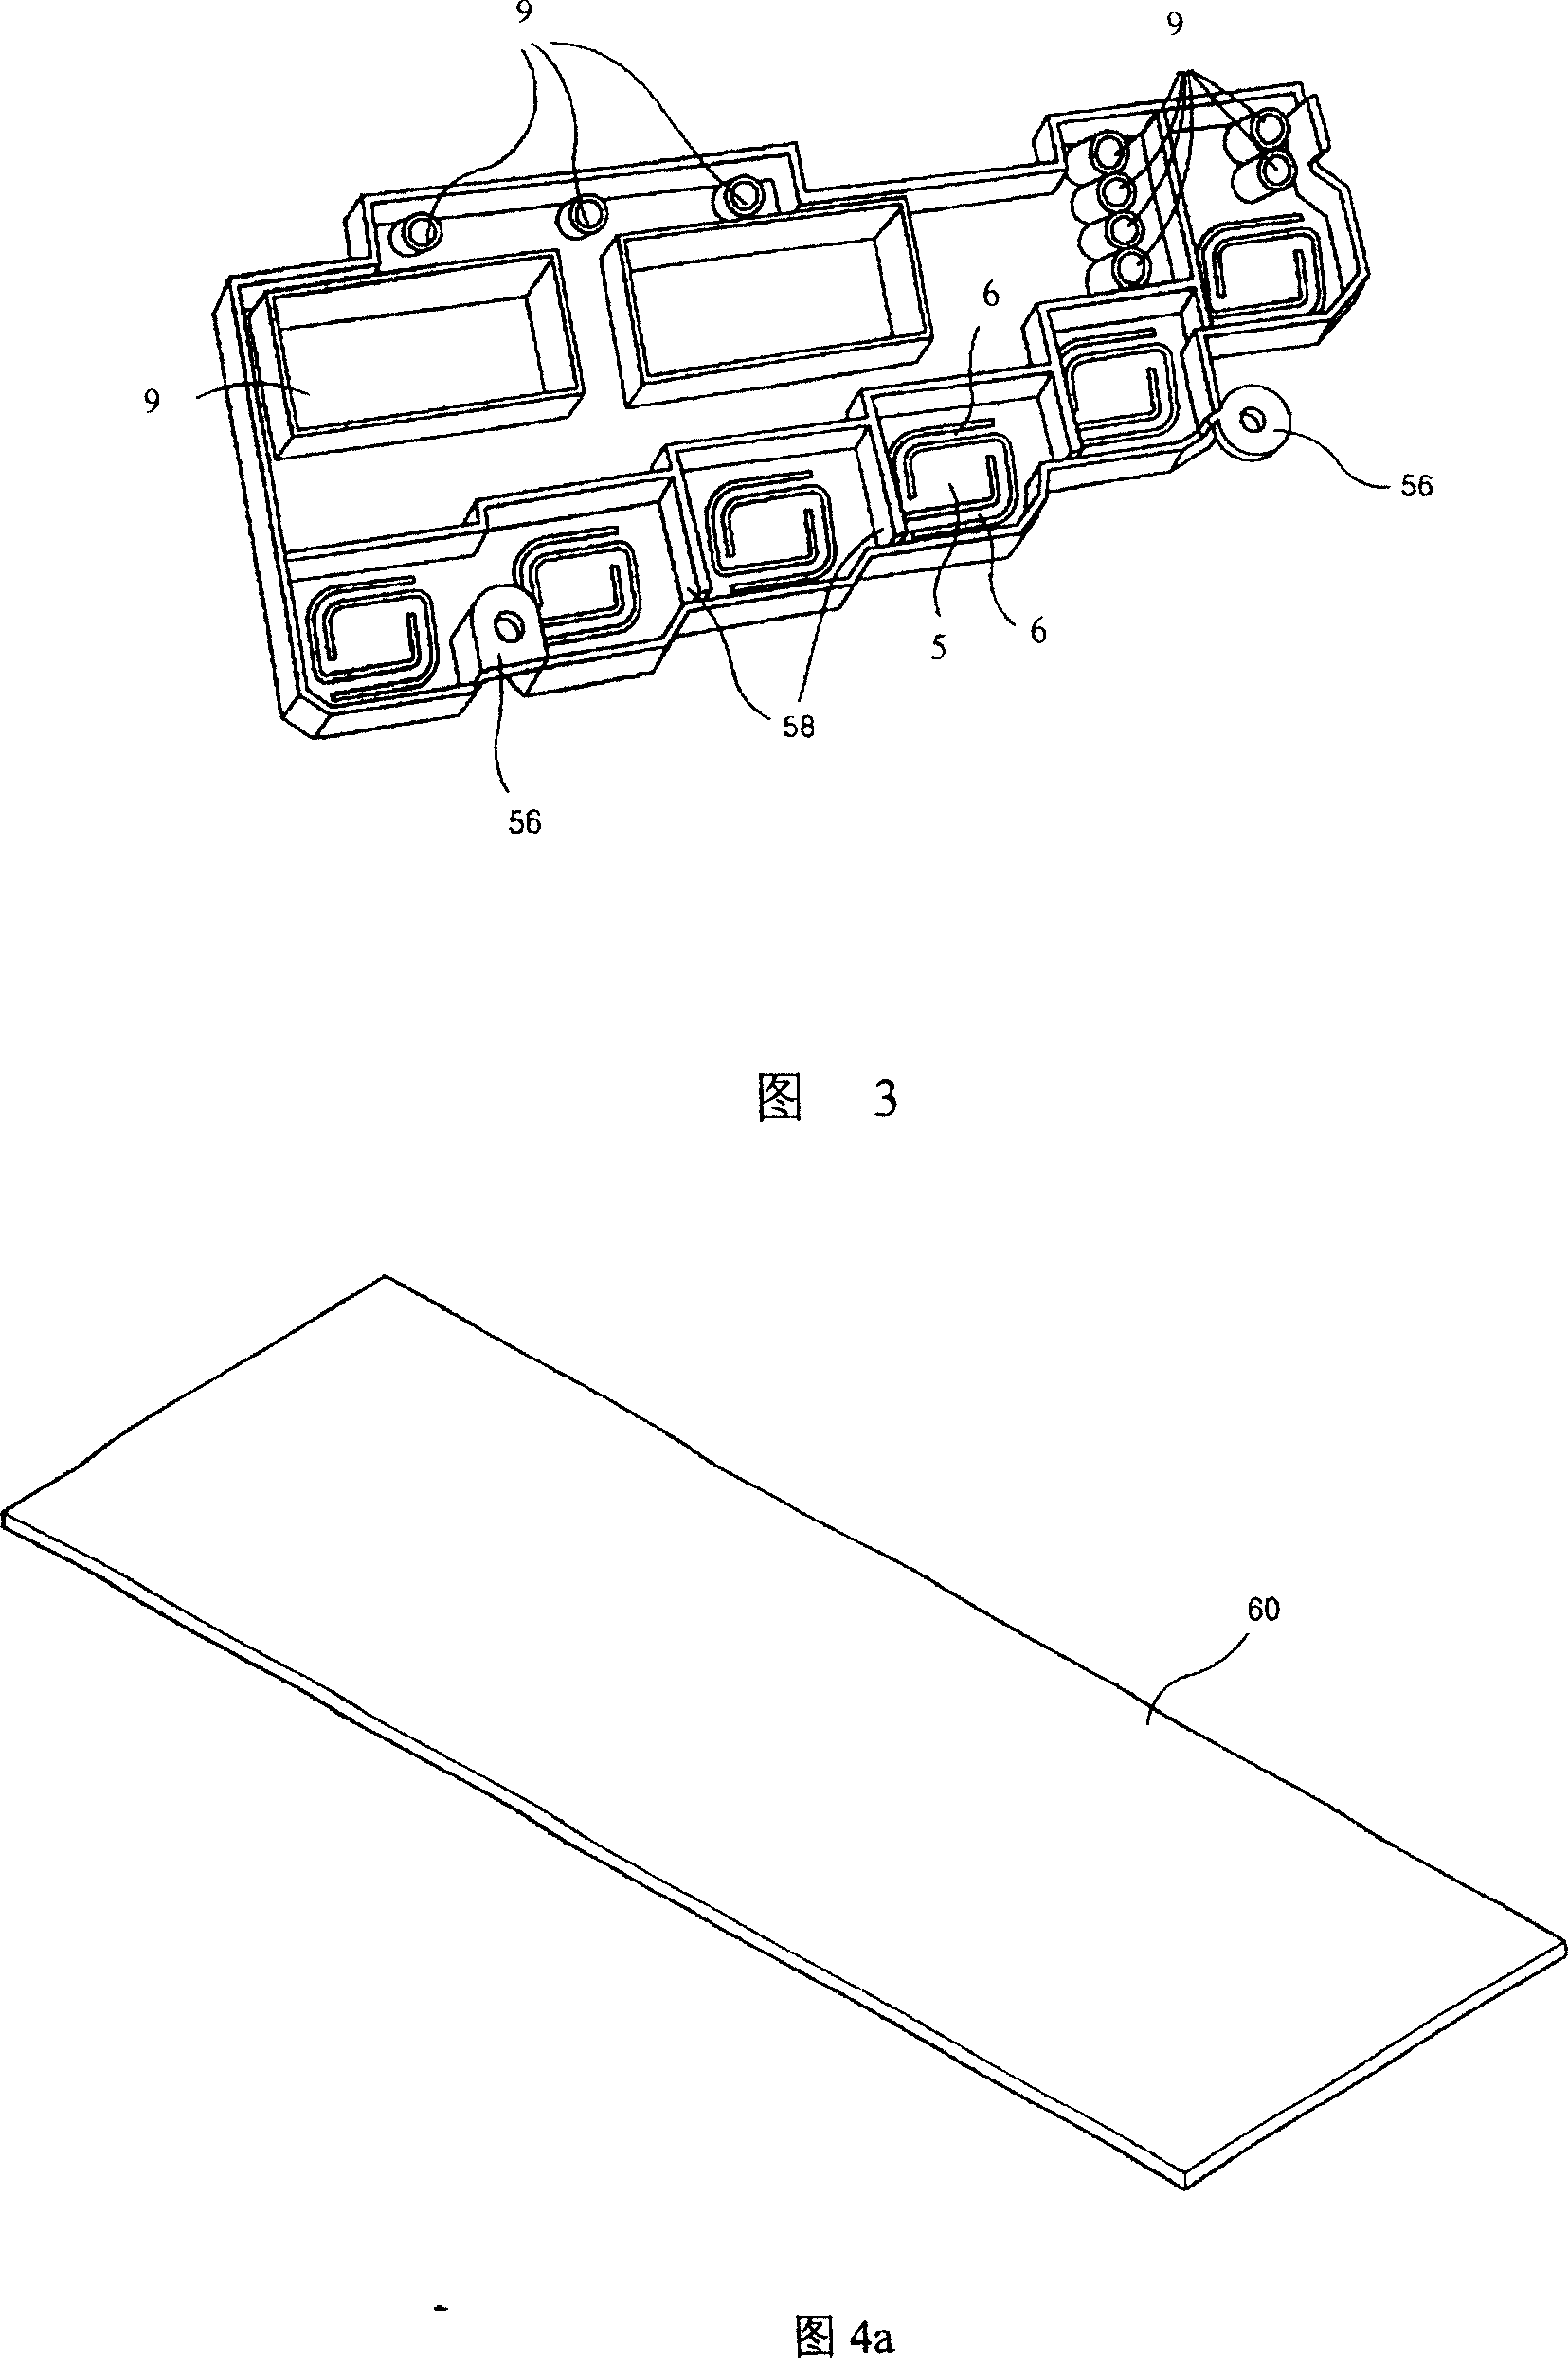 Control panel component of household electrical appliance and method for making the same